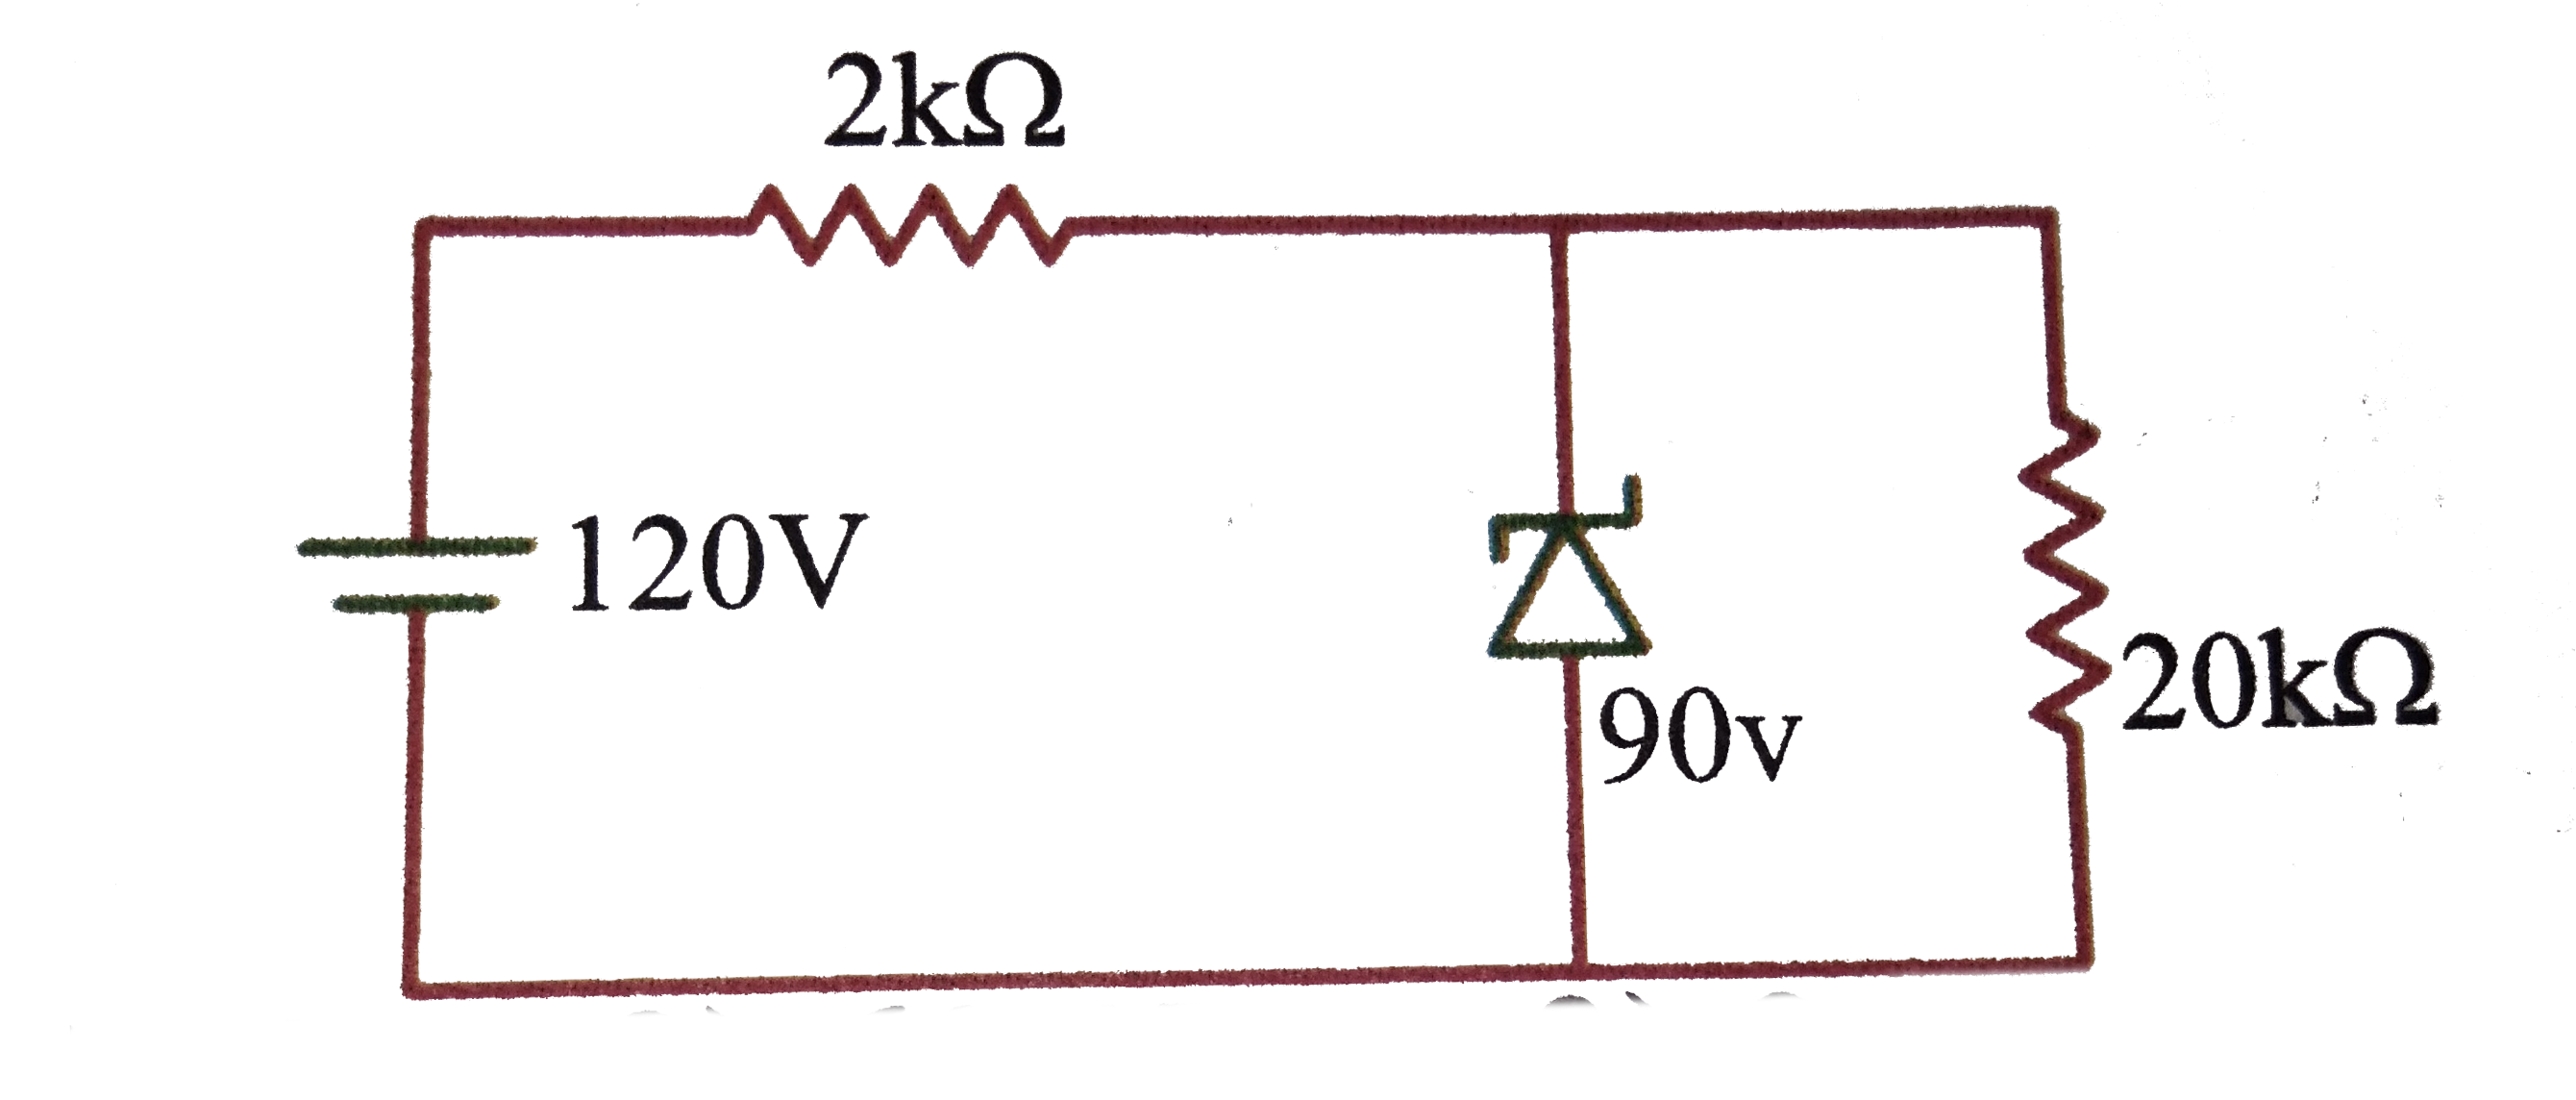 In the figure shown the potential drop across the series resistor is